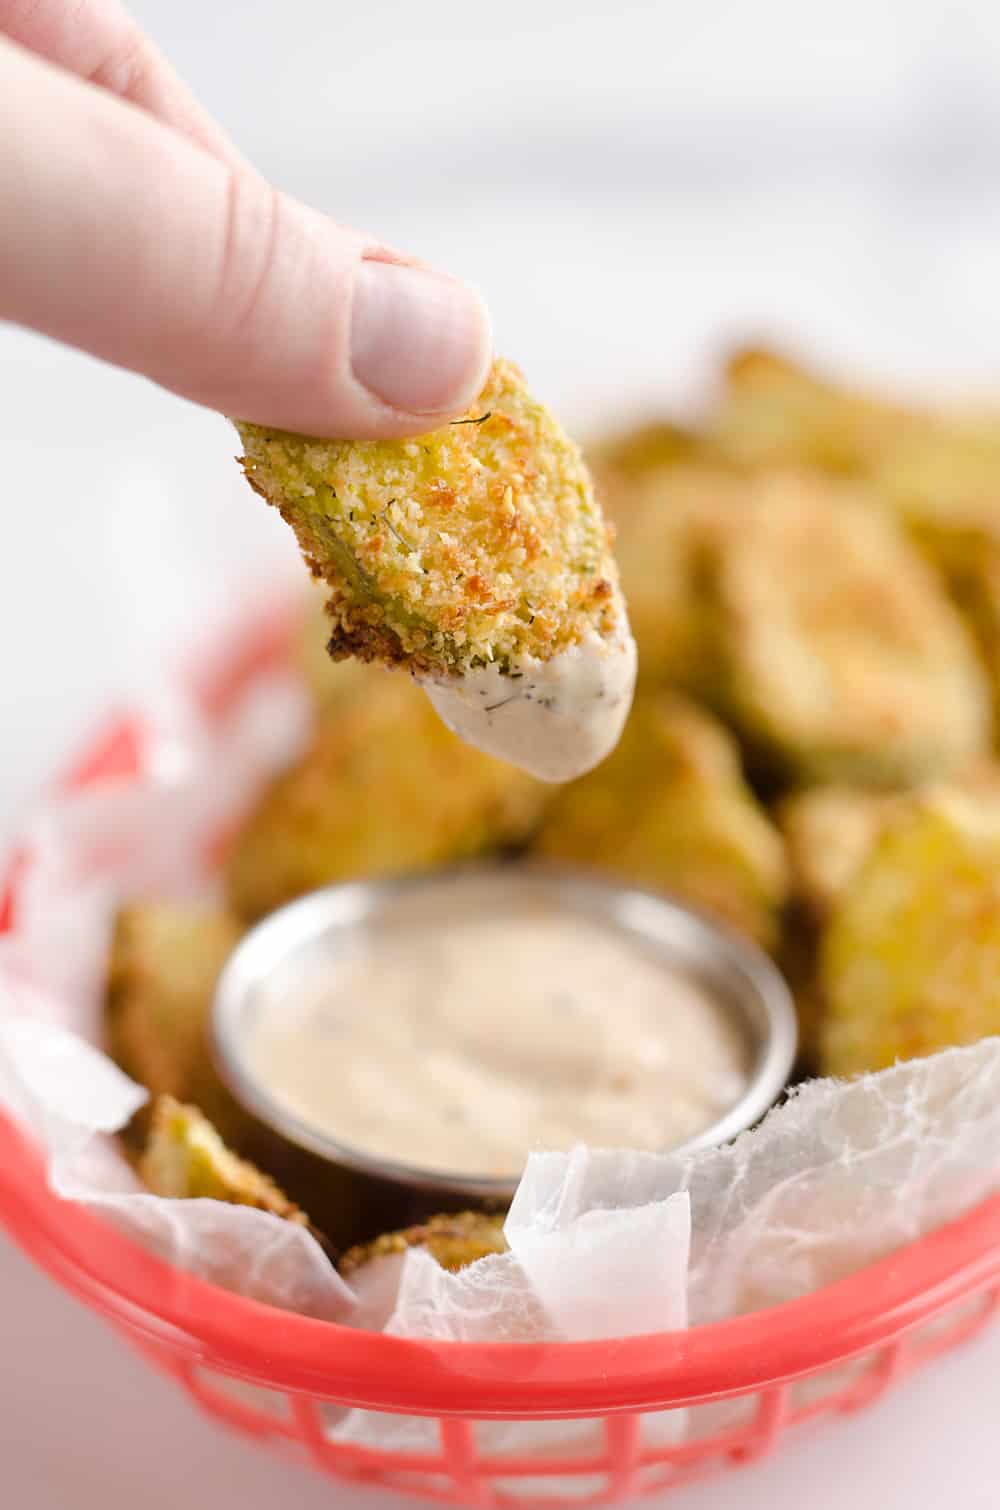 Airfryer Parmesan Dill Fried Pickle Chips are a quick and easy appetizer made extra crunchy in your Airfryer without all the fat from oil. This low-fat snack is sure to satisfy your craving for something salty!